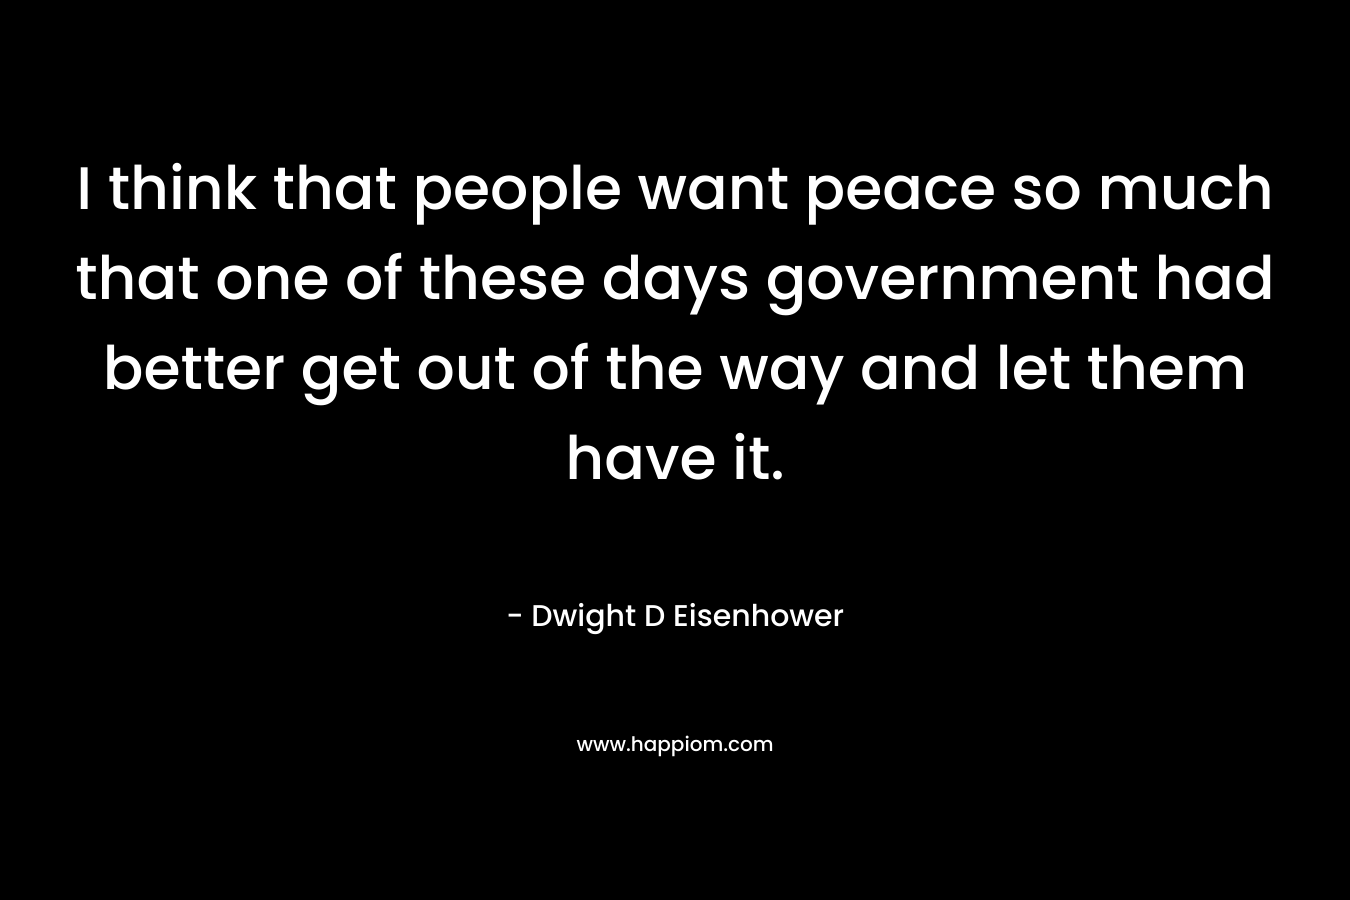 I think that people want peace so much that one of these days government had better get out of the way and let them have it.